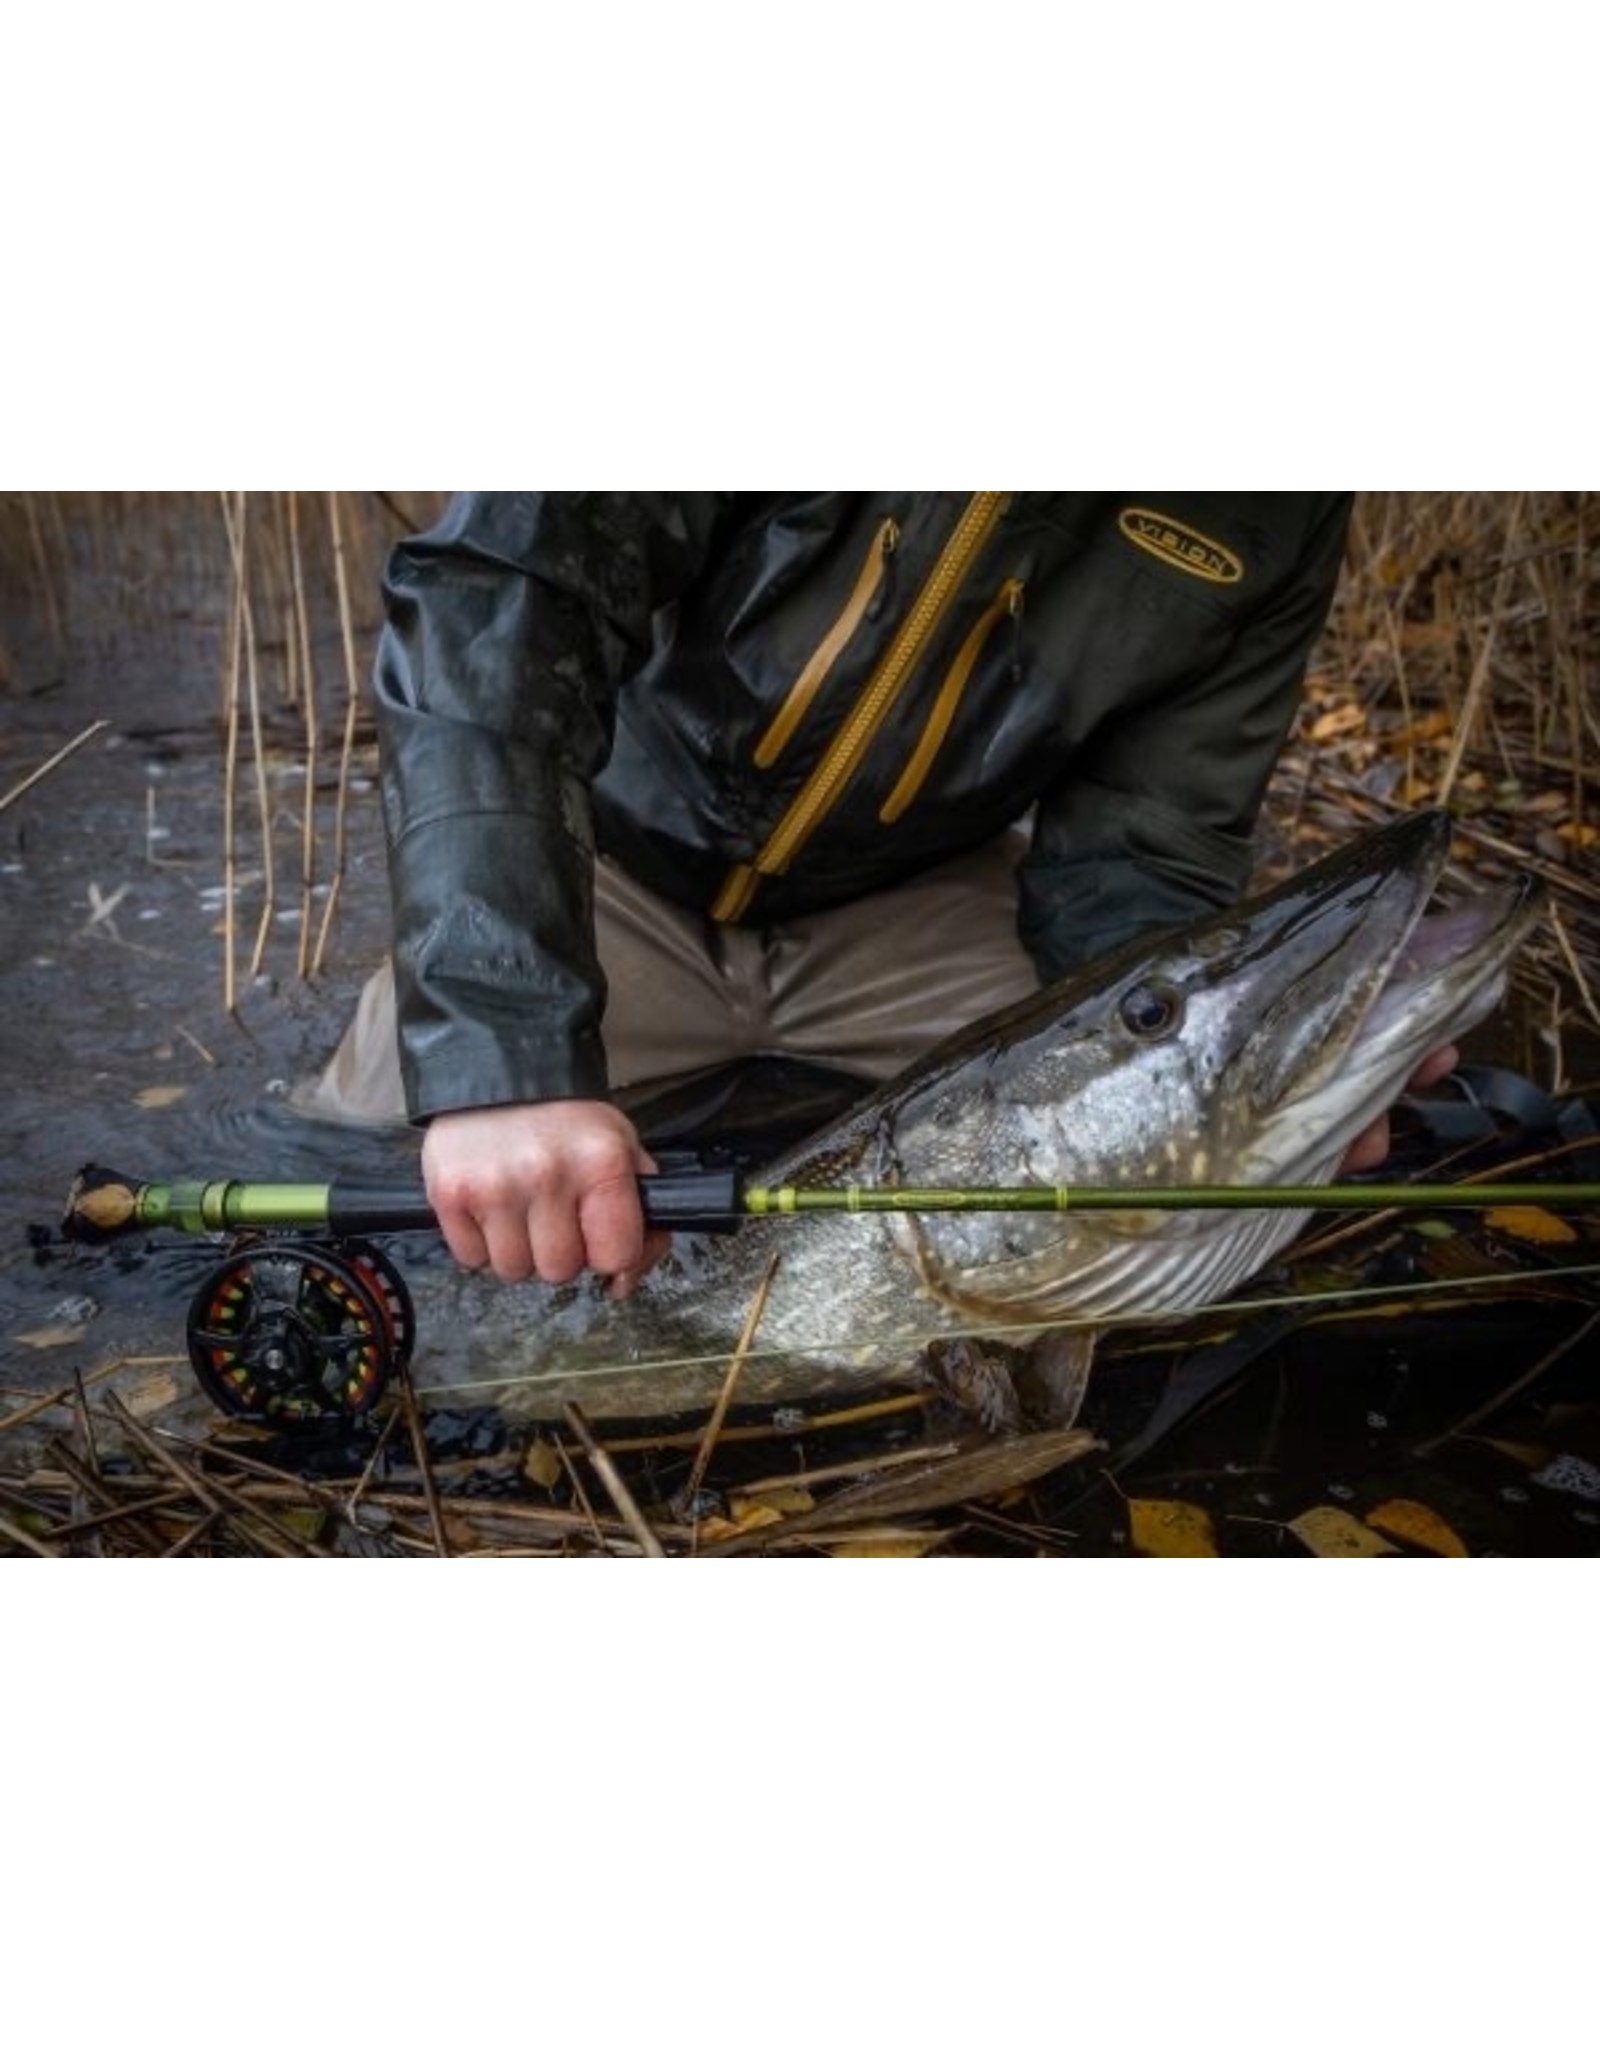 VISION FLY FISHING PIKE OUTFIT 9' 9wt